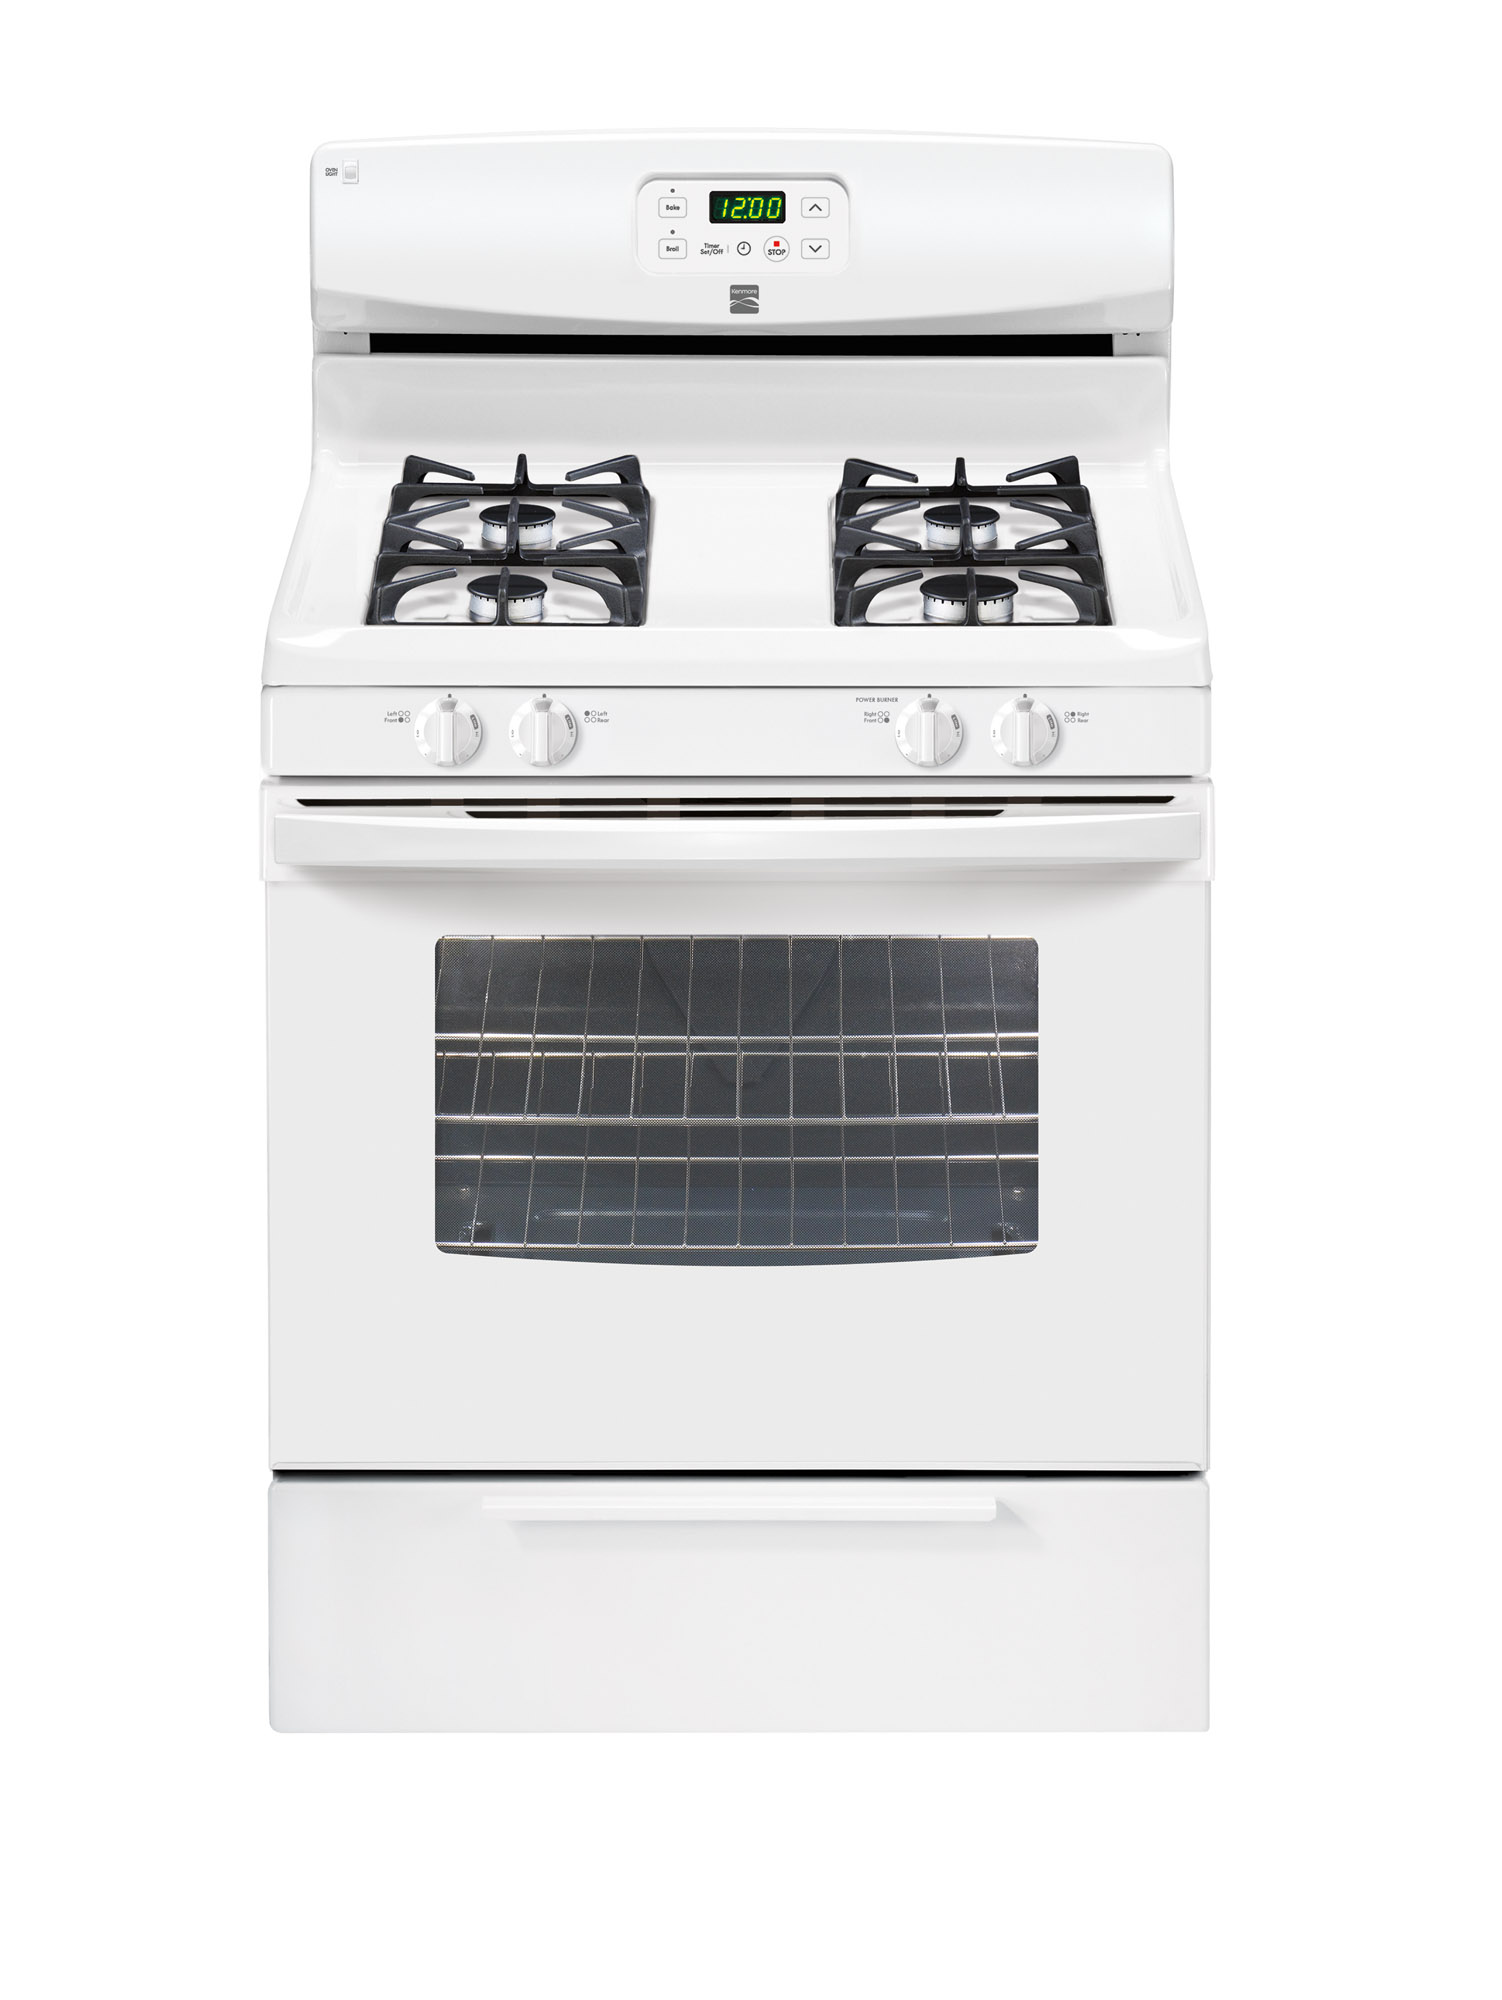 How To Fix A Kenmore Range Stove Oven Range Stove Oven Troubleshooting